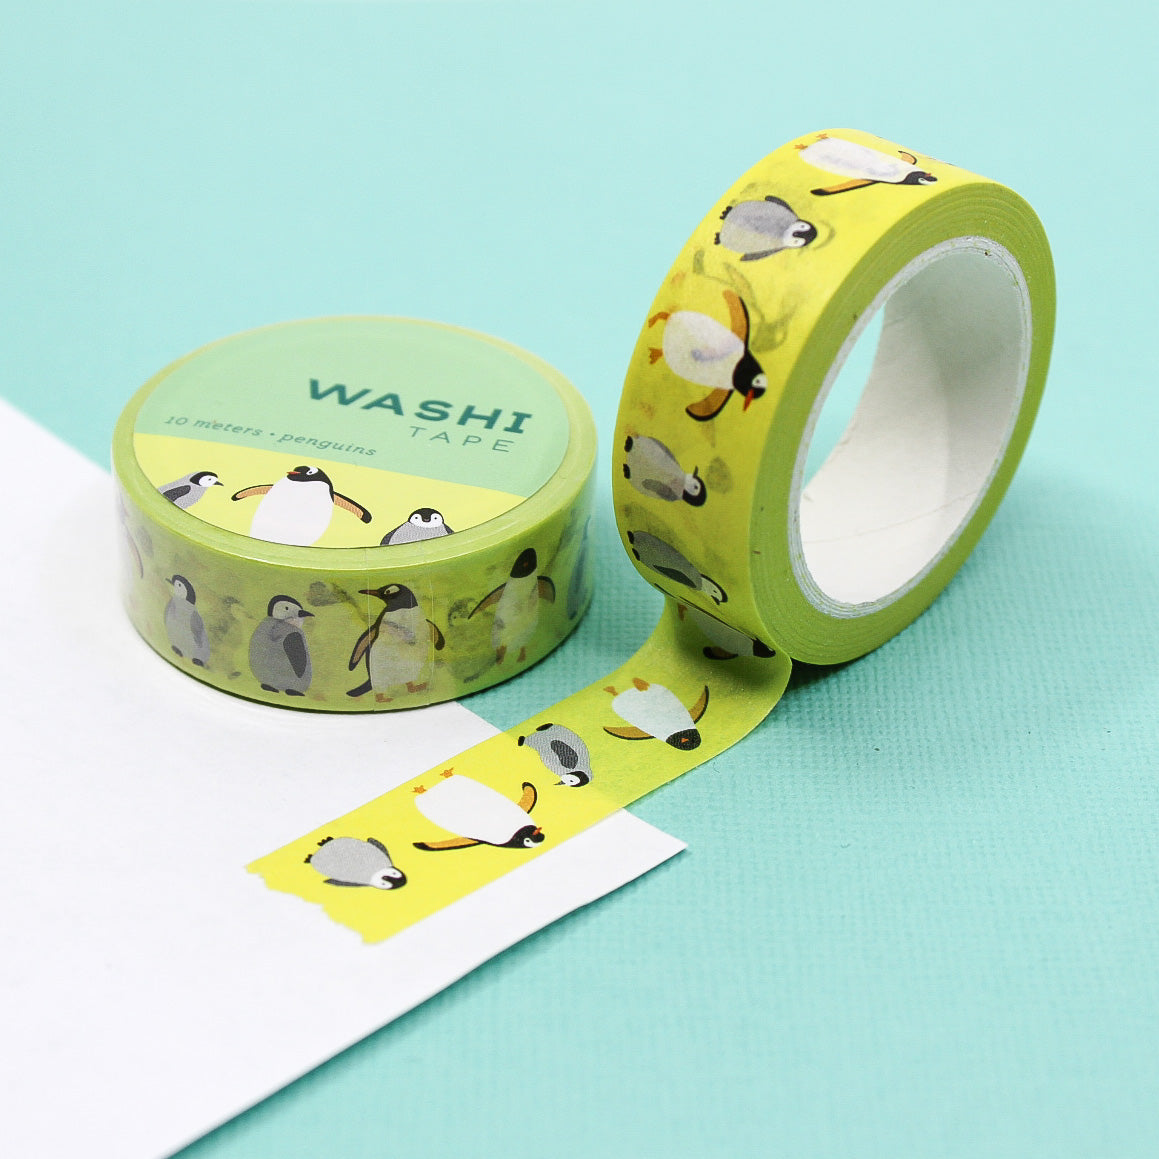 This charming washi tape features adorable penguins in various poses, adding a playful and festive touch to your winter-themed crafts. Perfect for scrapbooking, card making, and other creative projects. These tapes are sold at BBB Supplies Craft Shop.